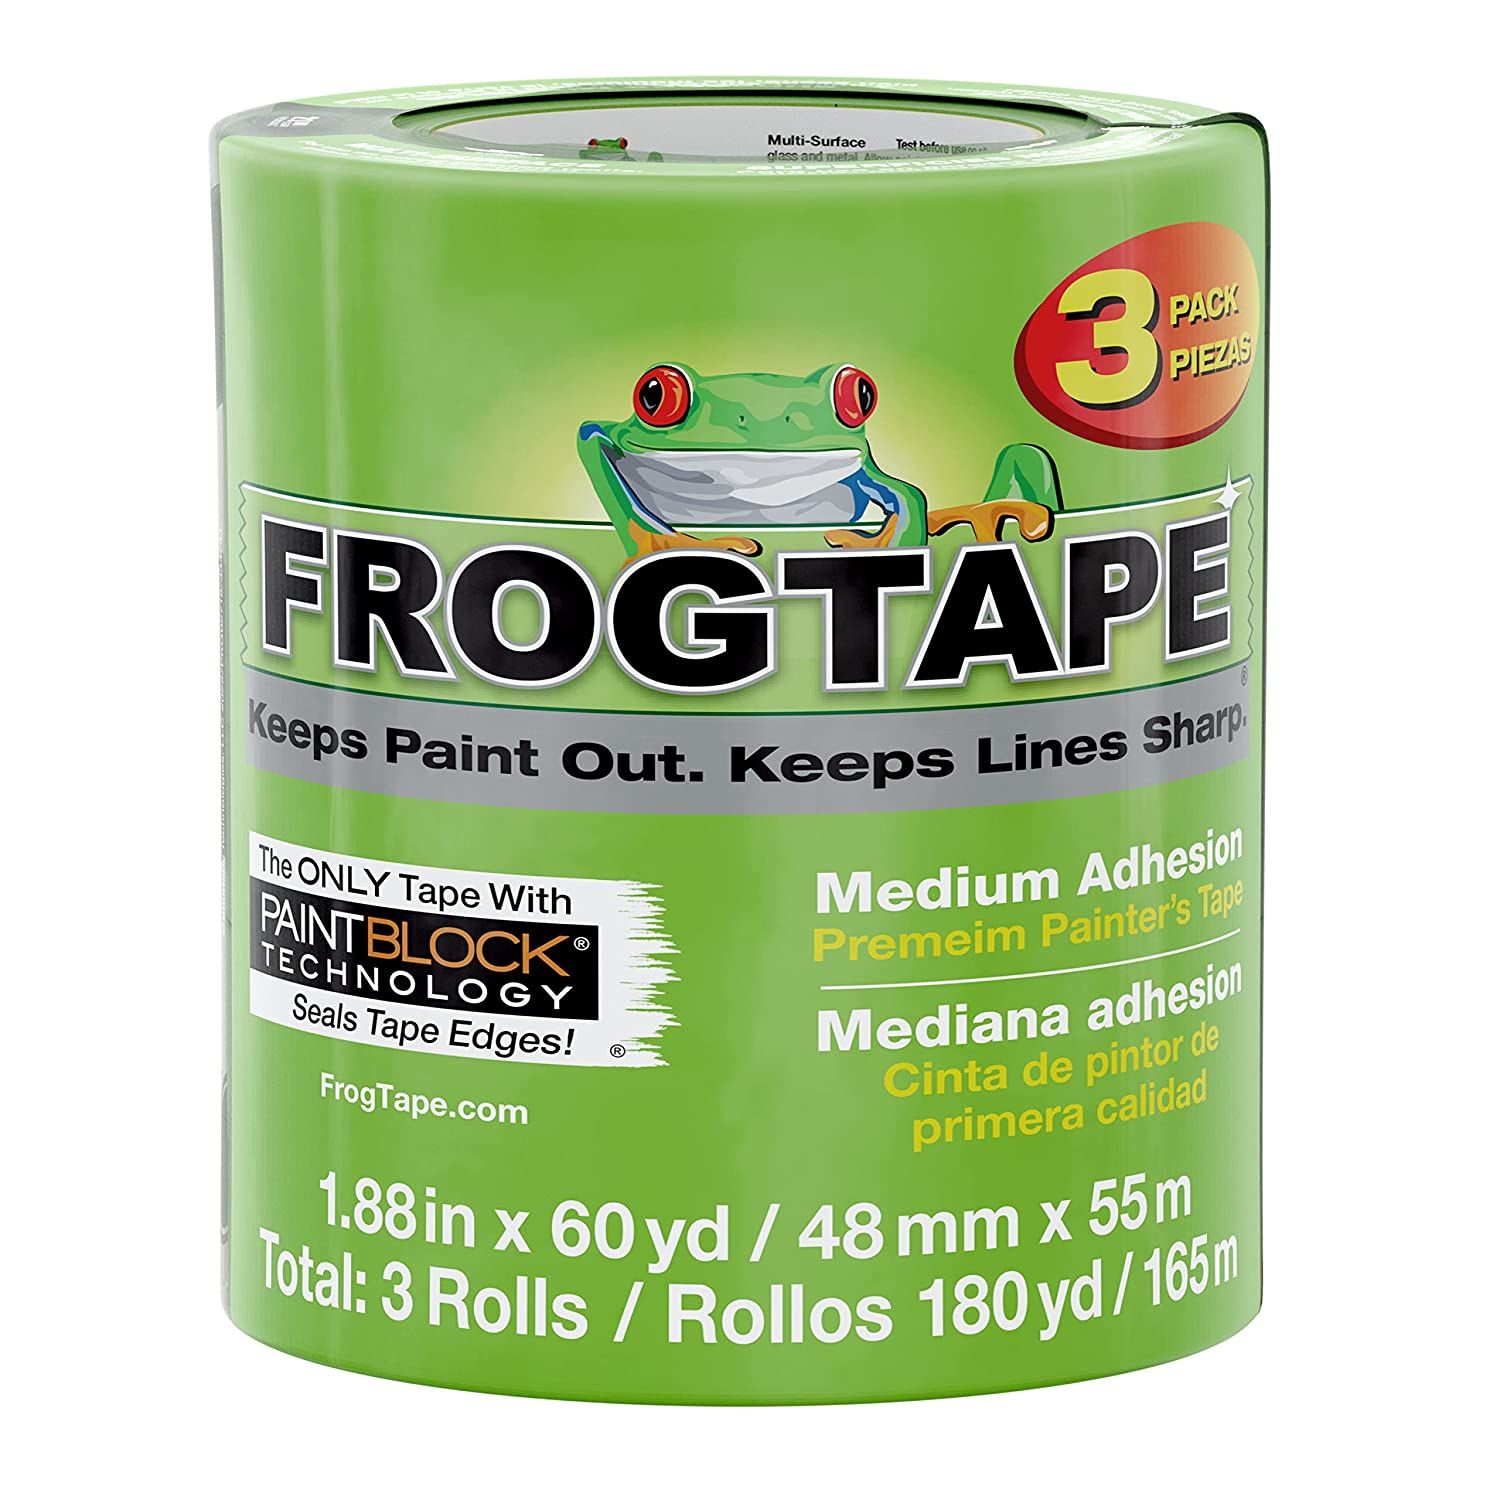 FROGTAPE 240661 Multi-Surface Painter's Tape with PAINTBLOCK, Medium Adhesion, 1.88 Inches x 60 Y... | Amazon (US)